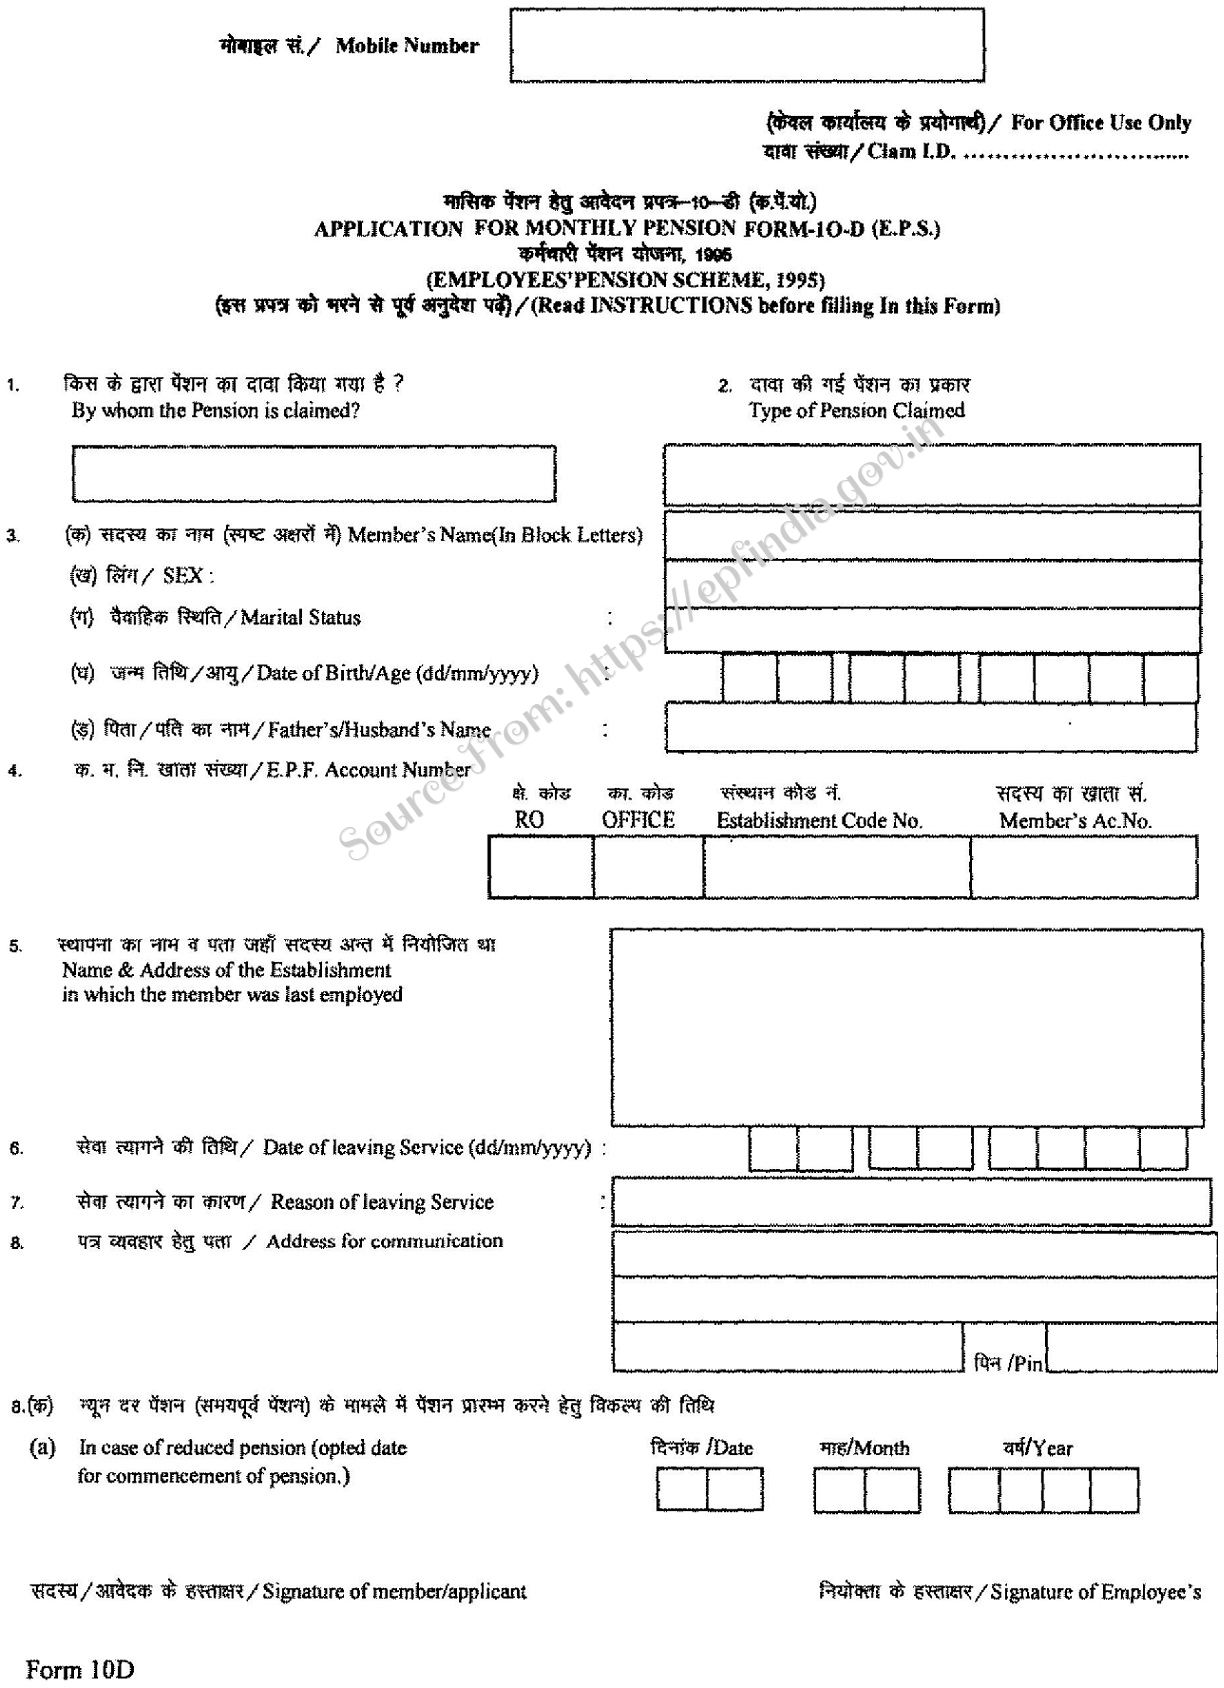 epf-withdrawal-form-download-form-5-9-10-c-10-d-13-14-19